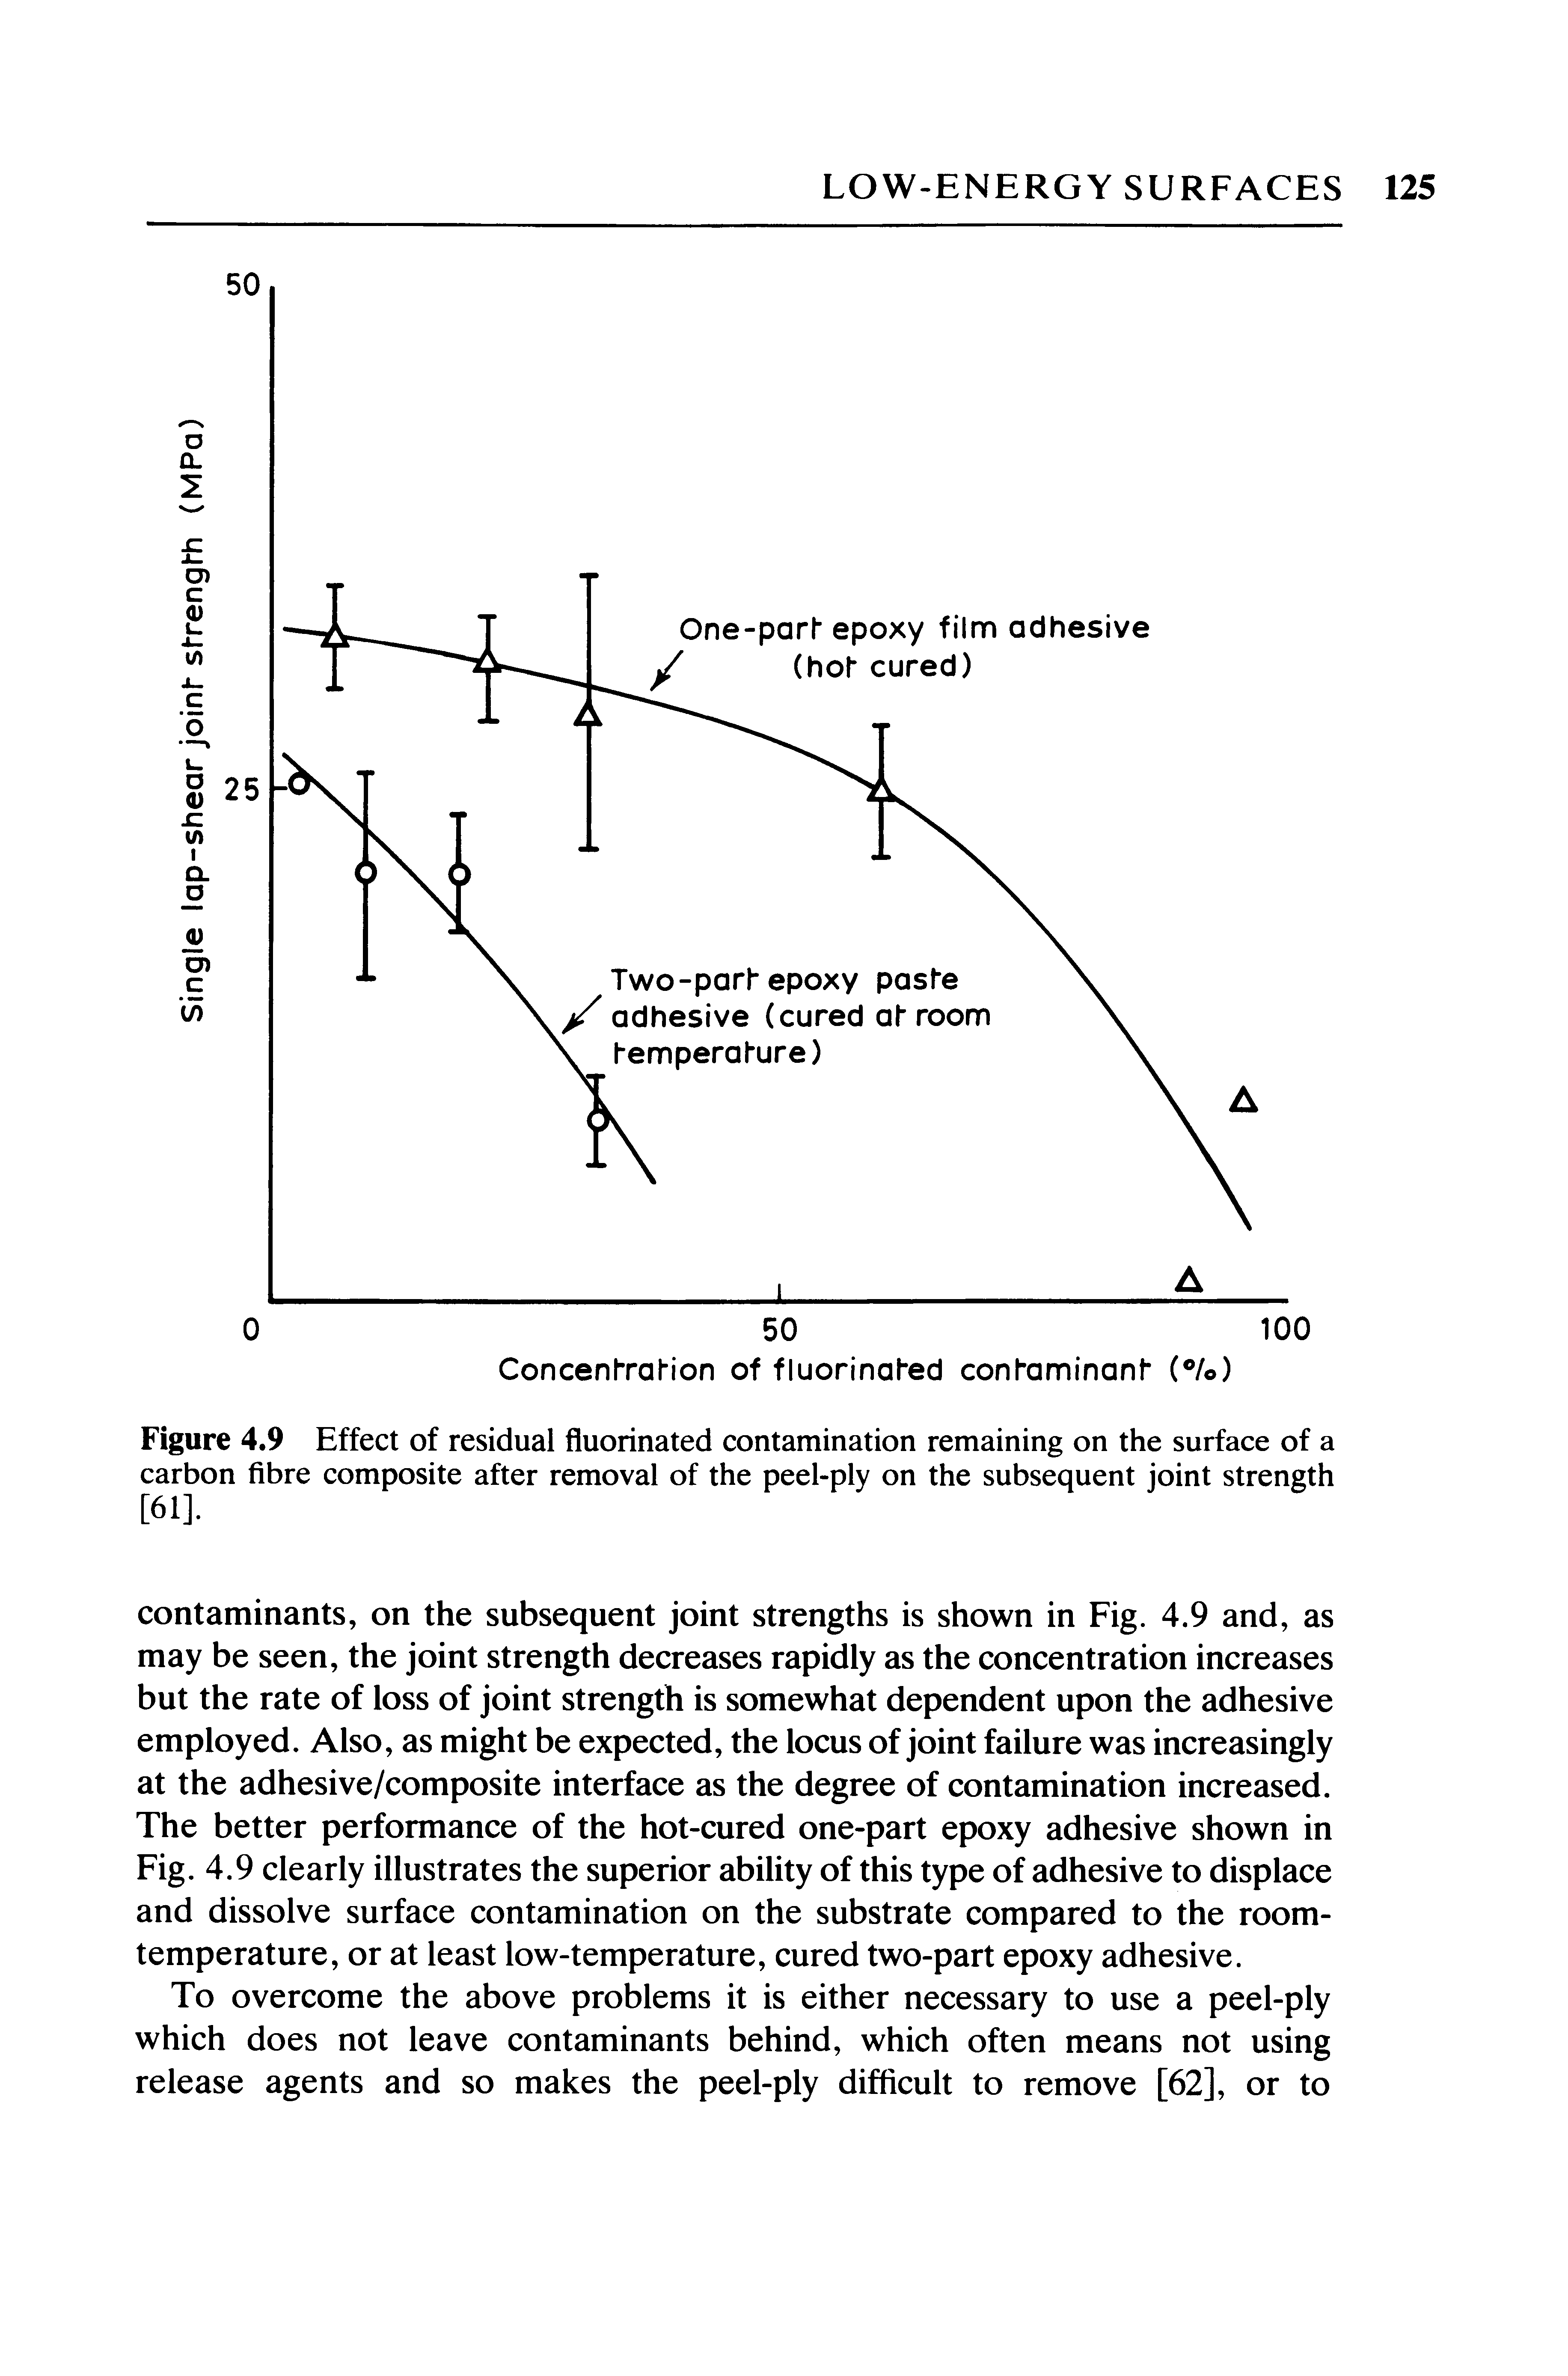 Figure 4.9 Effect of residual fluorinated contamination remaining on the surface of a carbon fibre composite after removal of the peel-ply on the subsequent joint strength [61].